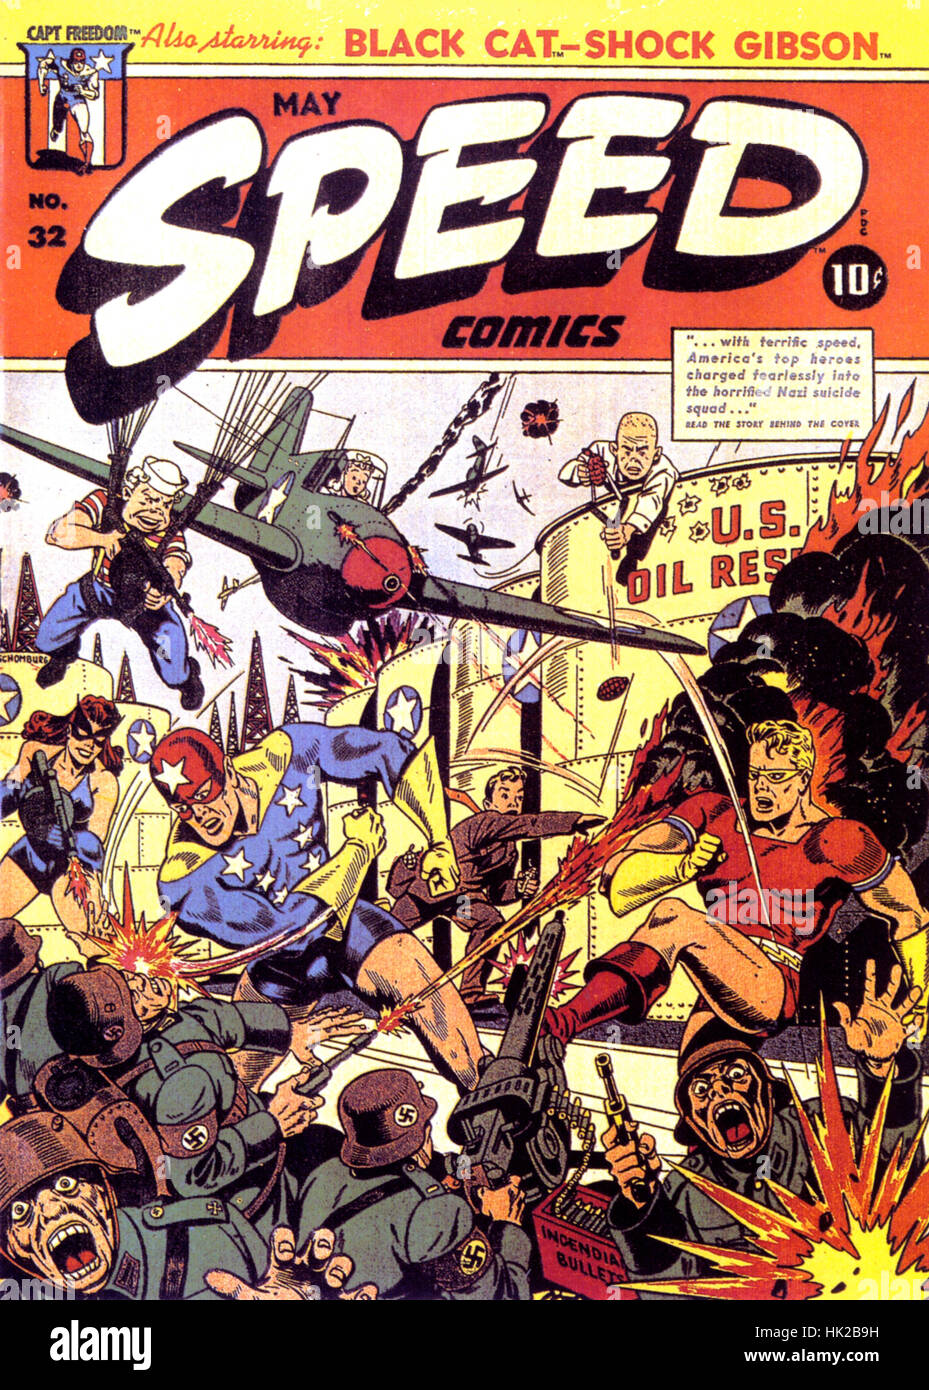 SPEED COMICS Issue no 32. Cover of 1 May 1944  showing American comic book heroes including Capt Freedom, Black Cat and Shock Gibson, giving the German army a hard time. The comic ran from 1939 to 1947. Stock Photo